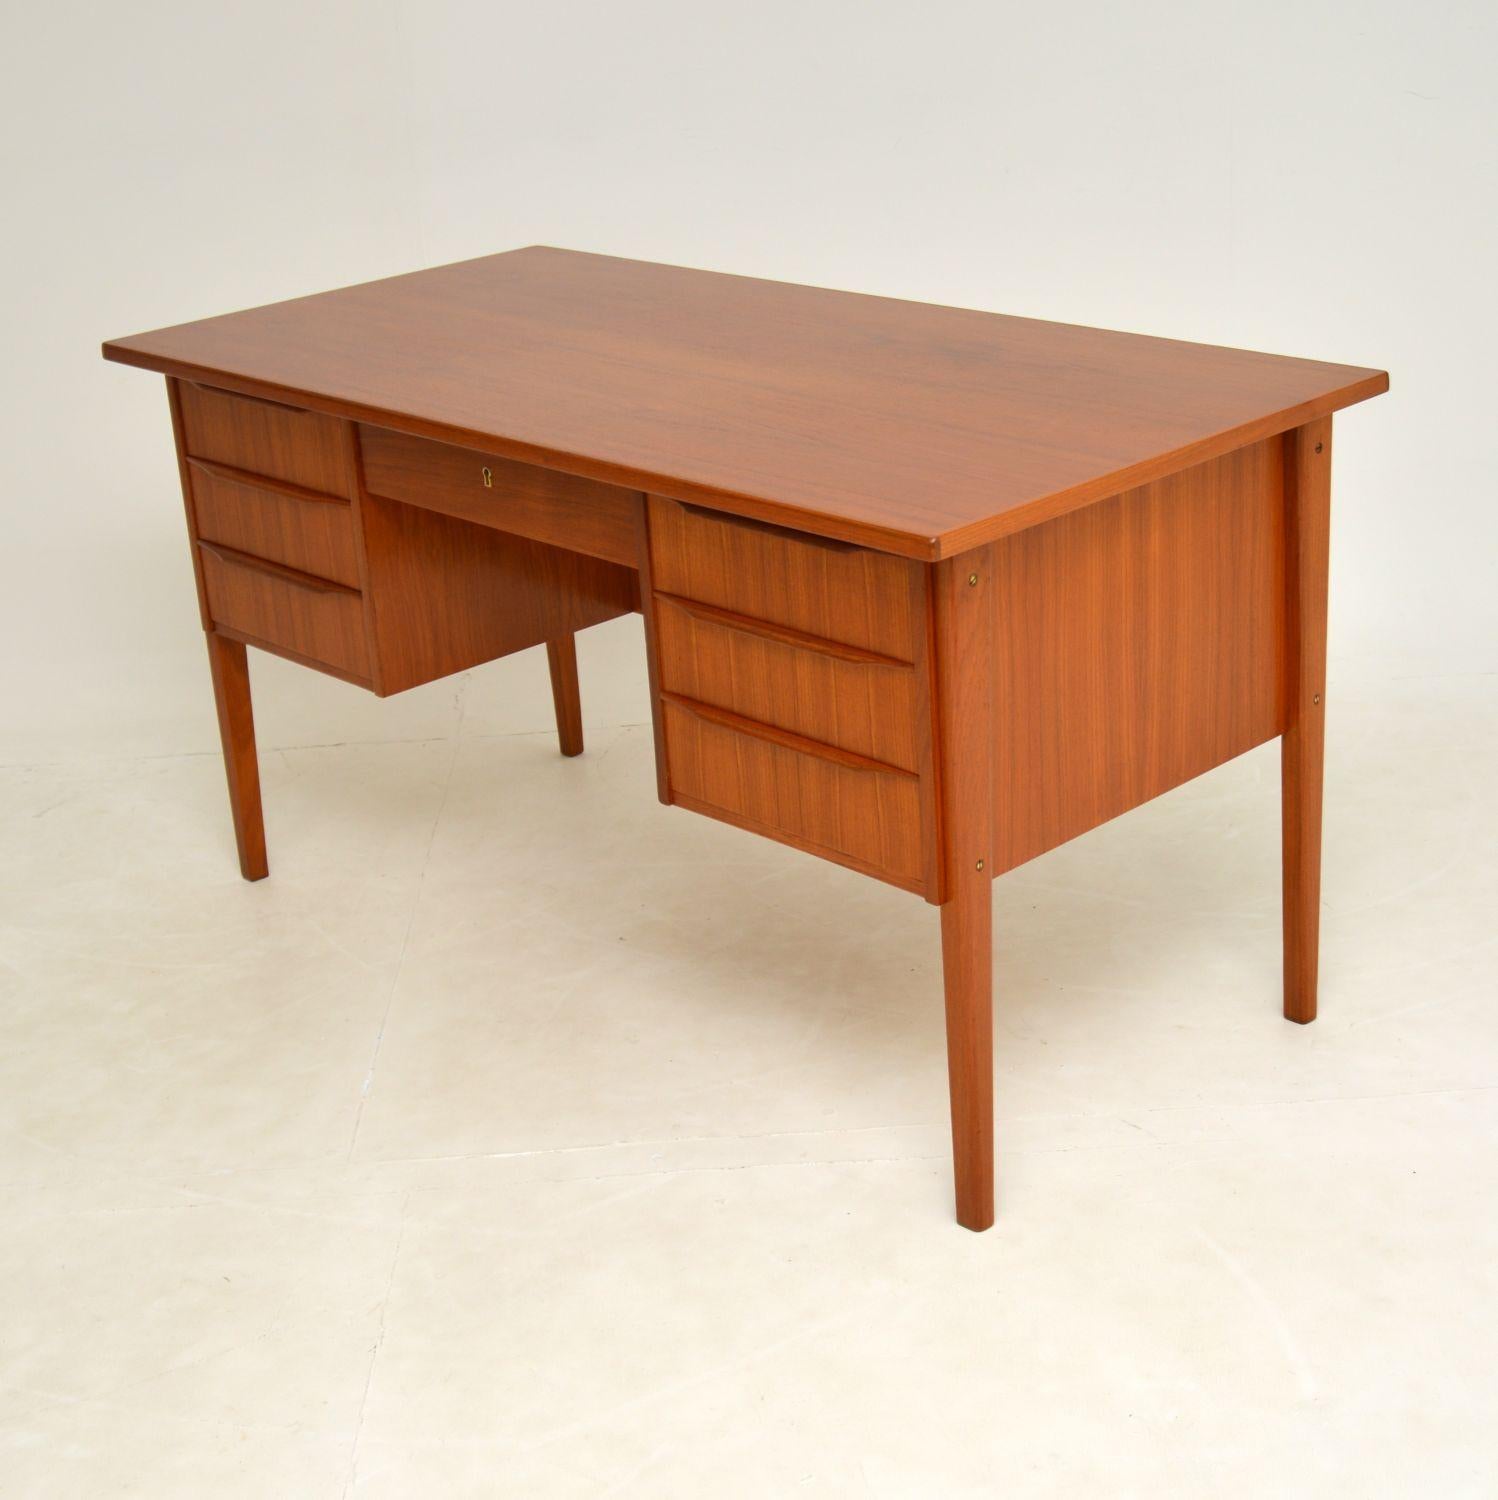 A stunning Danish teak desk of lovely proportions and style. This was made in Denmark in the 1960’s.

It is of amazing quality and beautifully designed. There are lipped handles on the drawers, lovely tapered legs and an open bookcase shelf on the